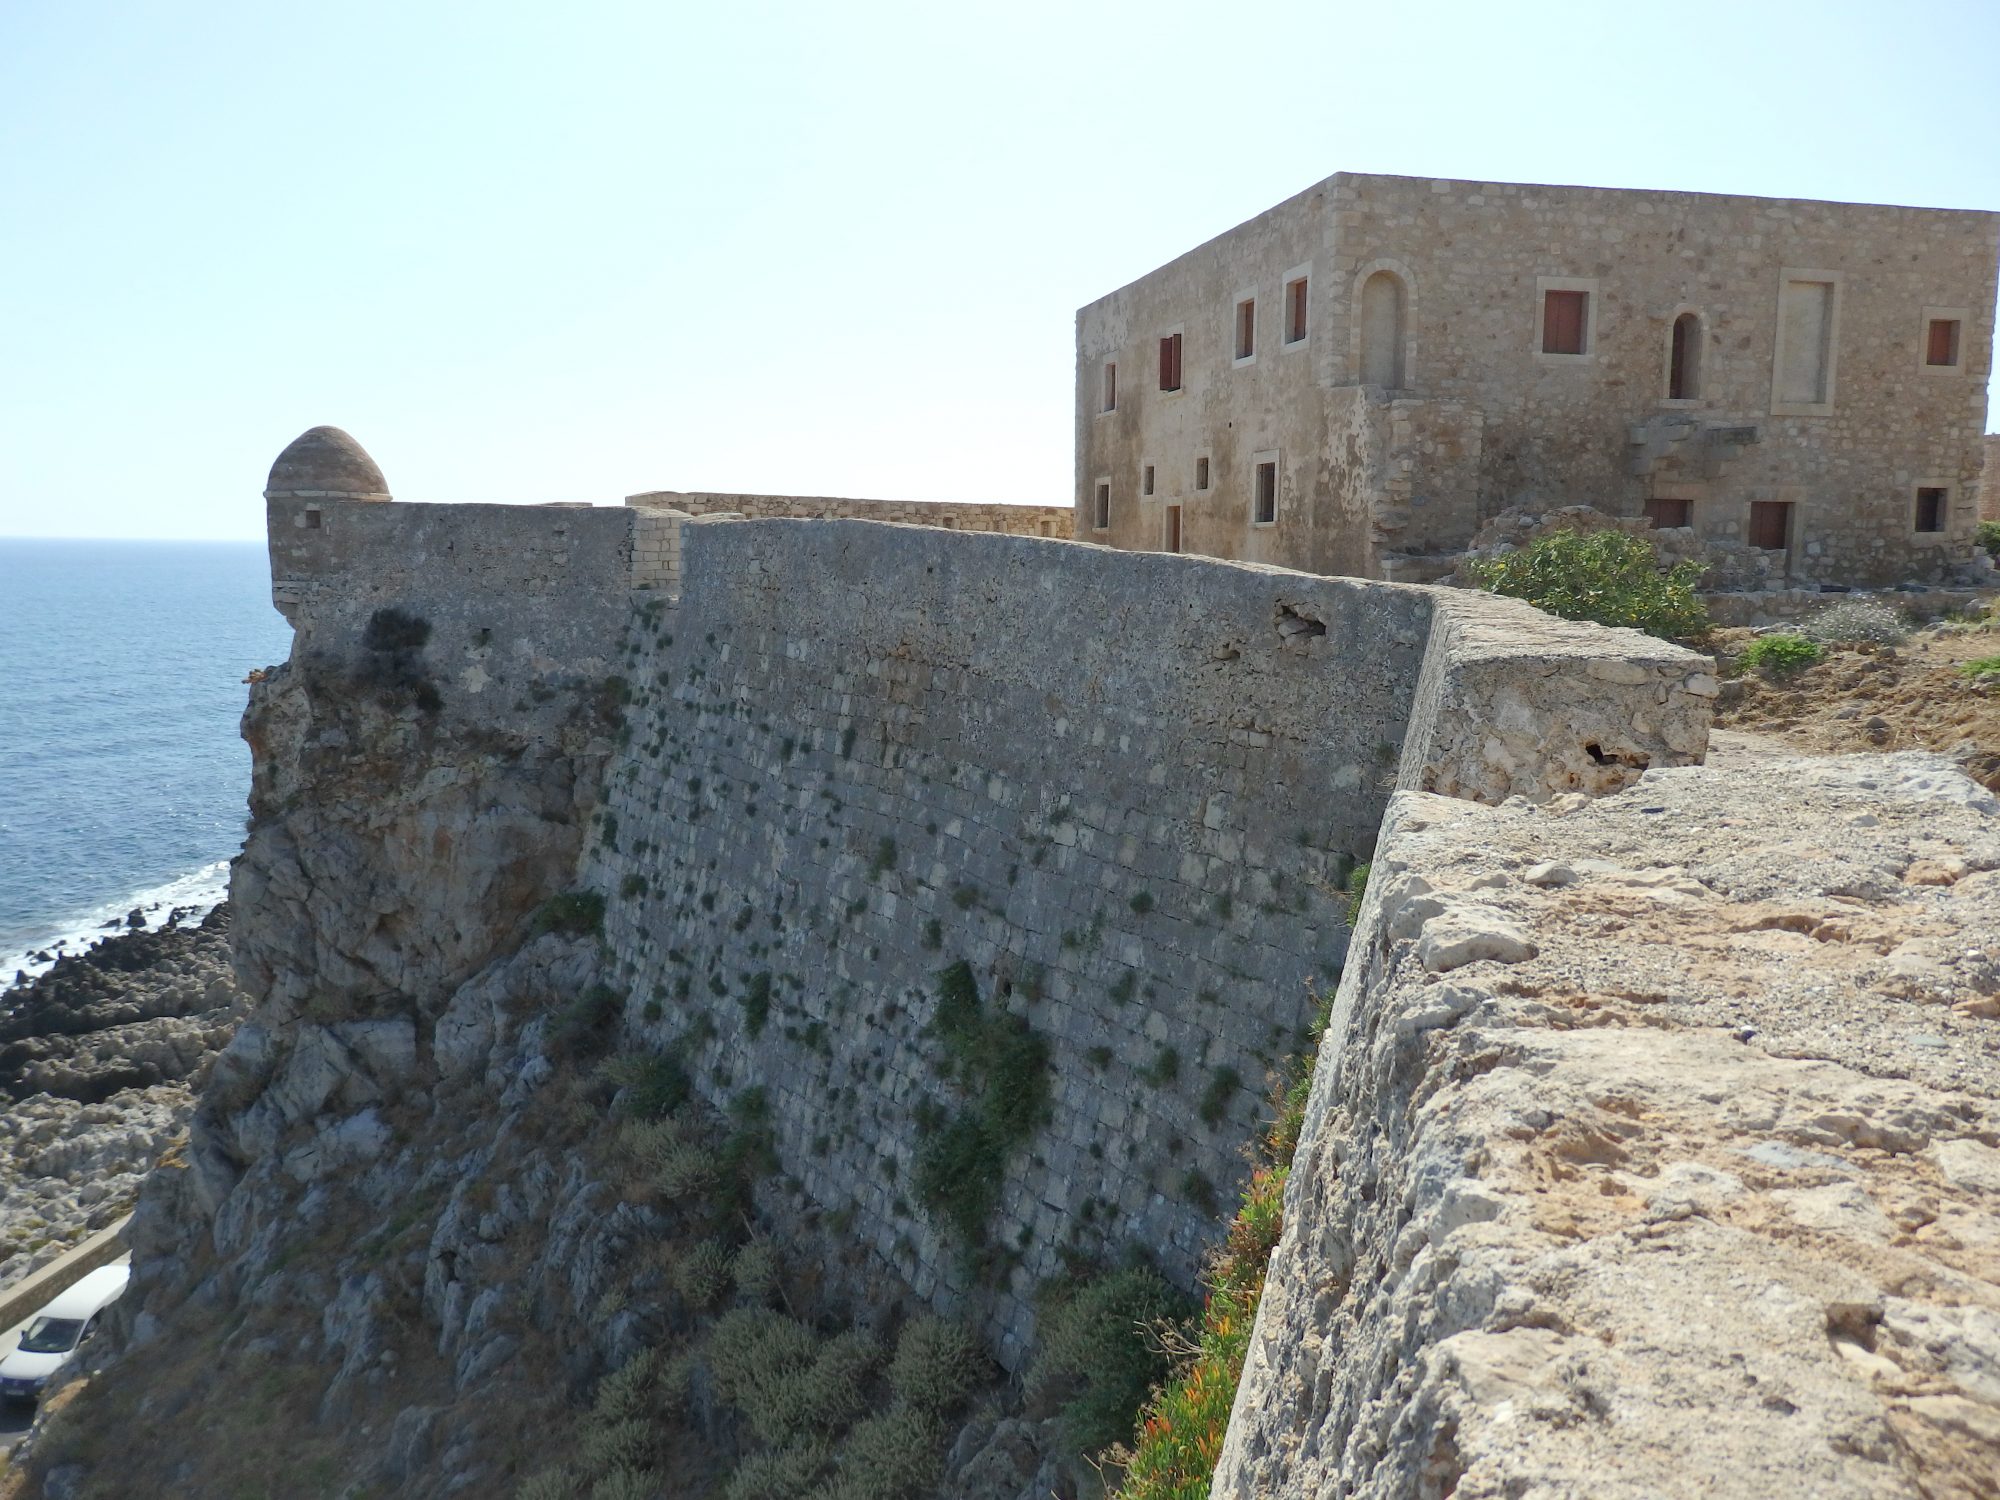 This view gives an idea of how the Rethymnon fortress walls tower above the sea. The building is the House of the Councillors.